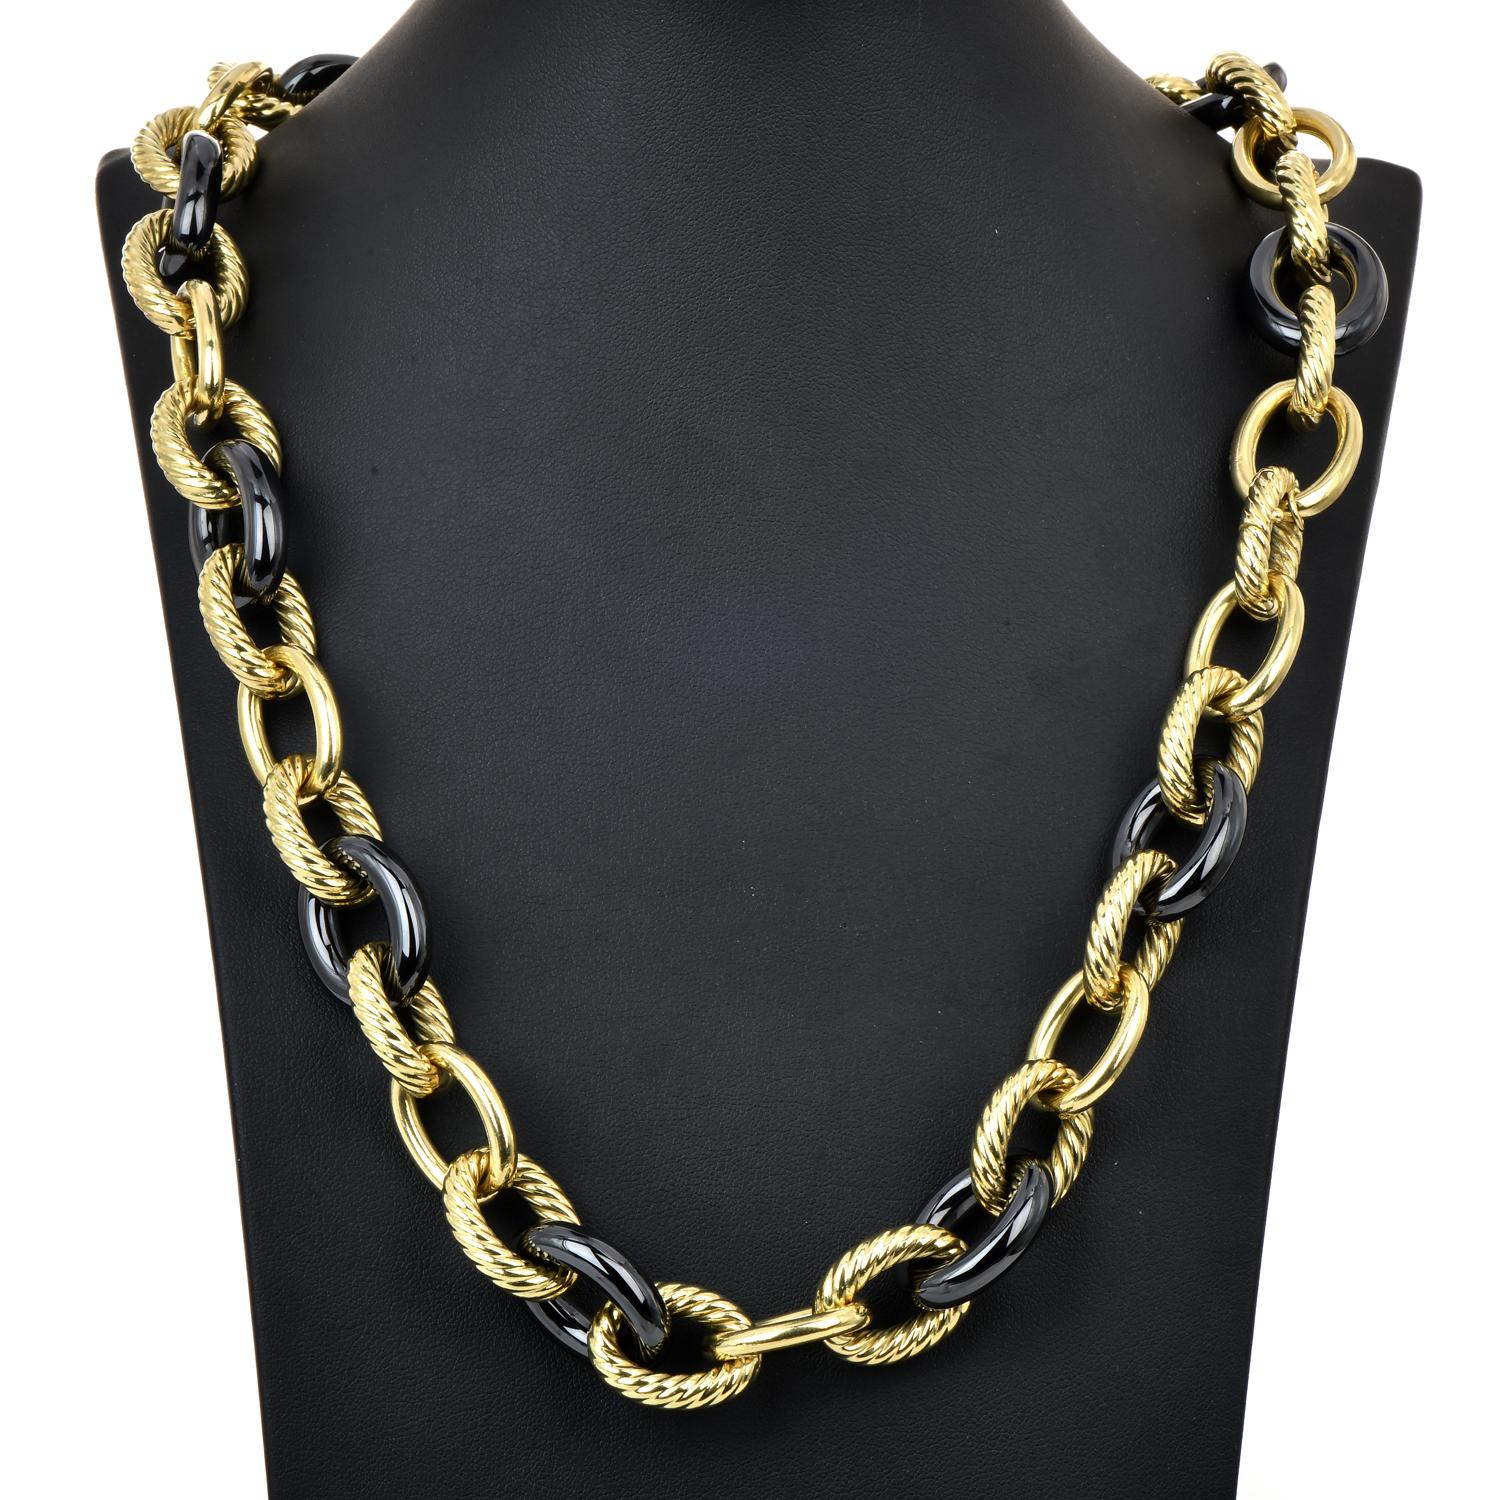 David Yurman 18K Yellow Gold Hematite 17 mm Large Link Chain Necklace In Excellent Condition For Sale In Miami, FL